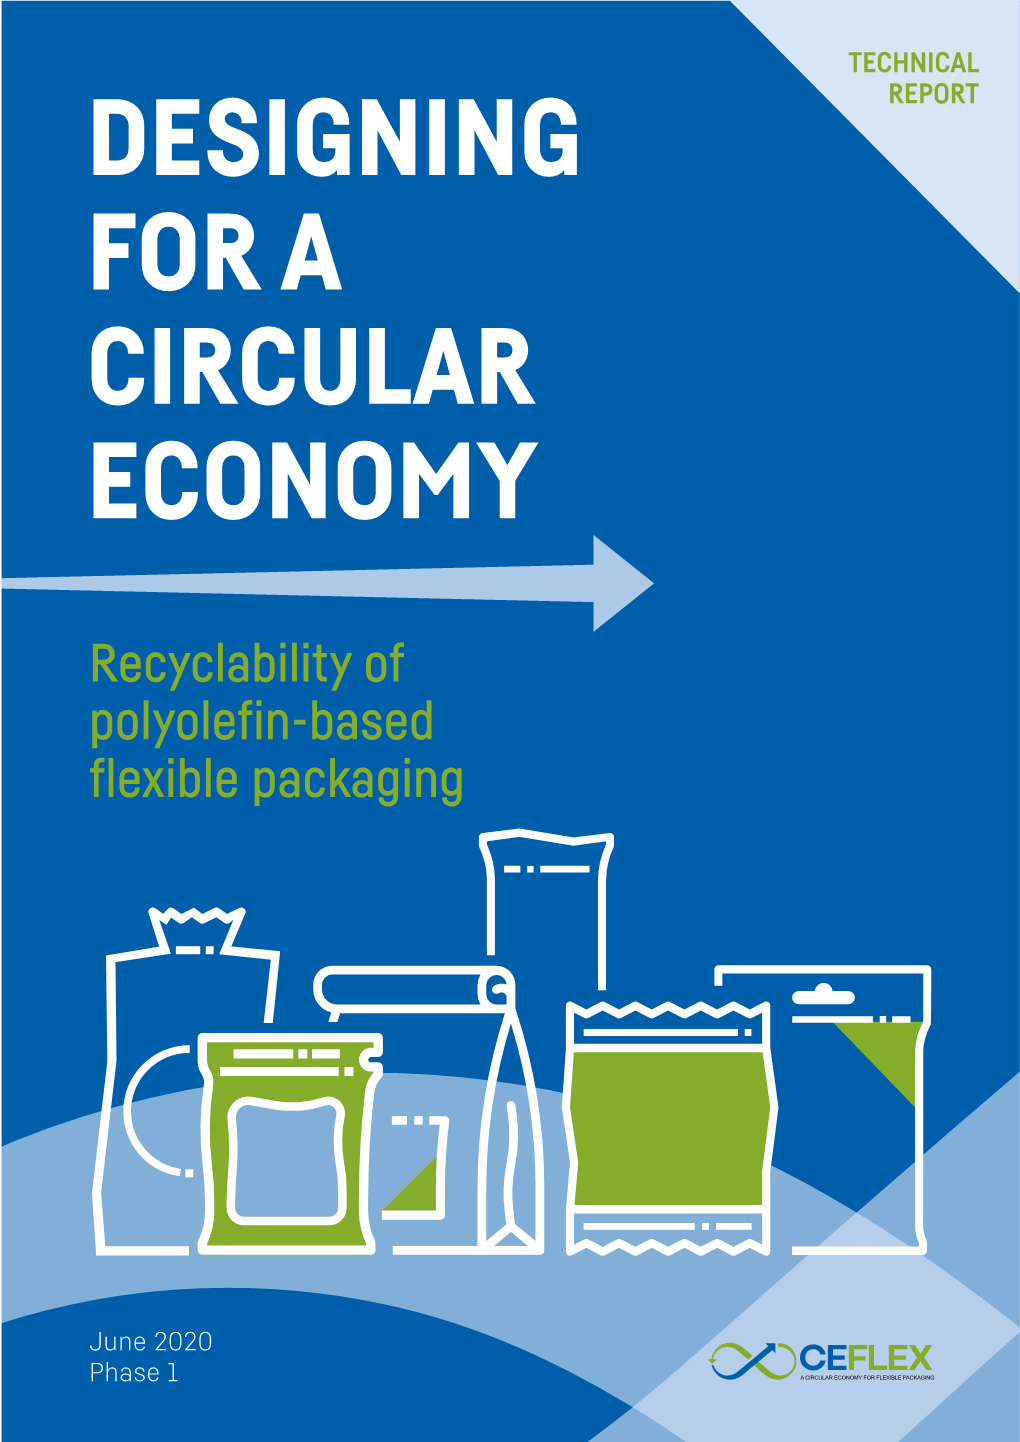 Designing for a Circular Economy 1 Introduction 6 Size, Shape and Construction